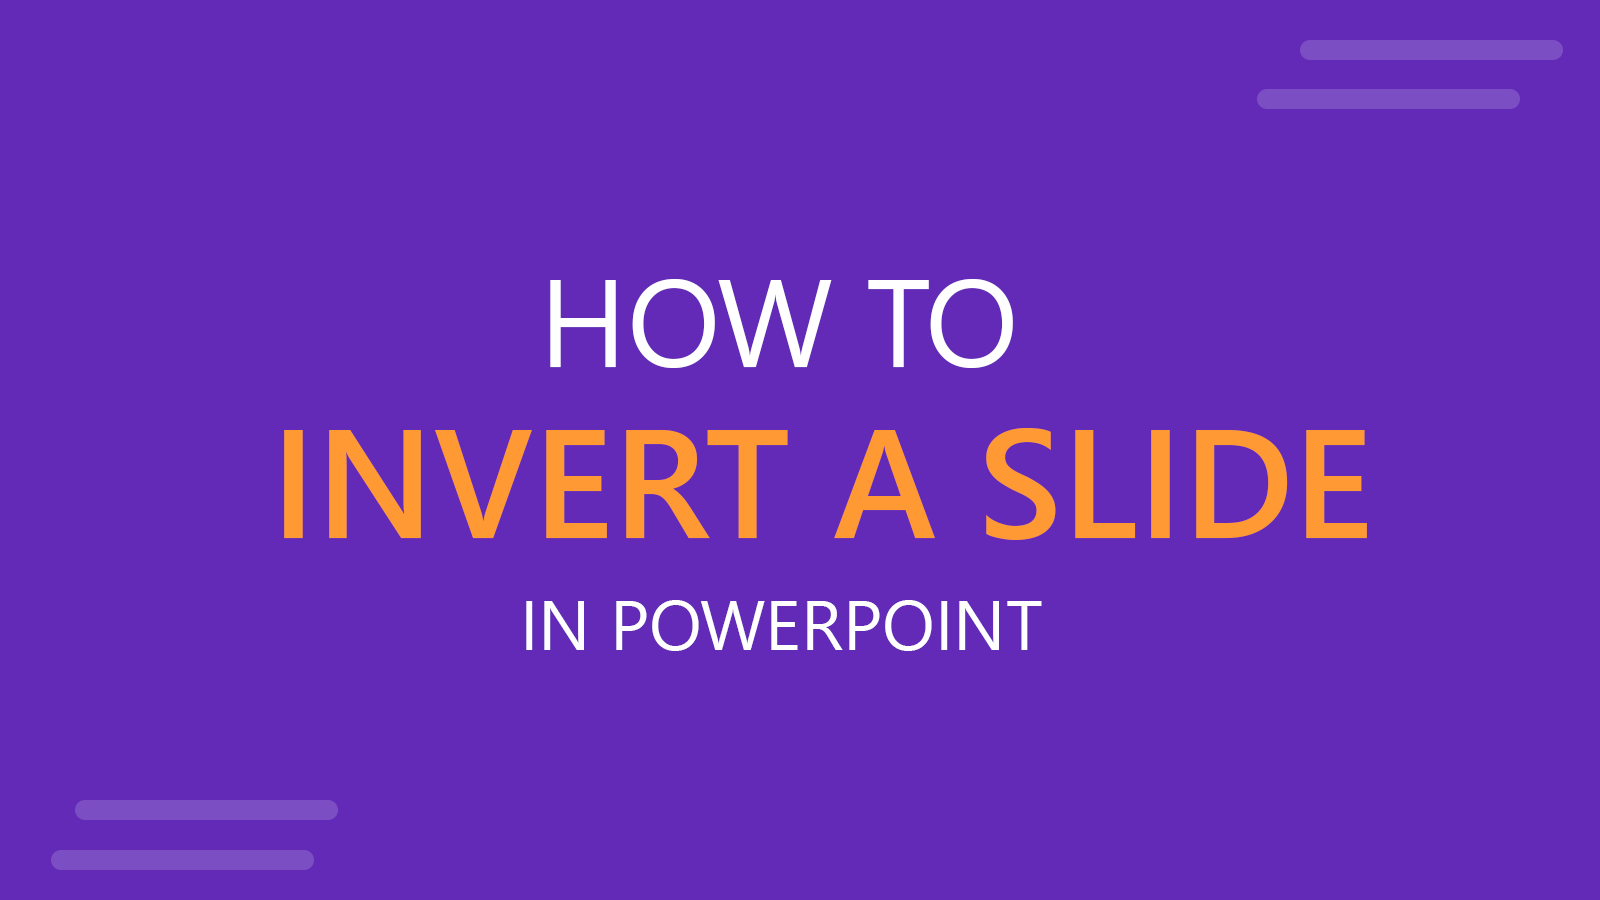 How to Invert a Slide in PowerPoint